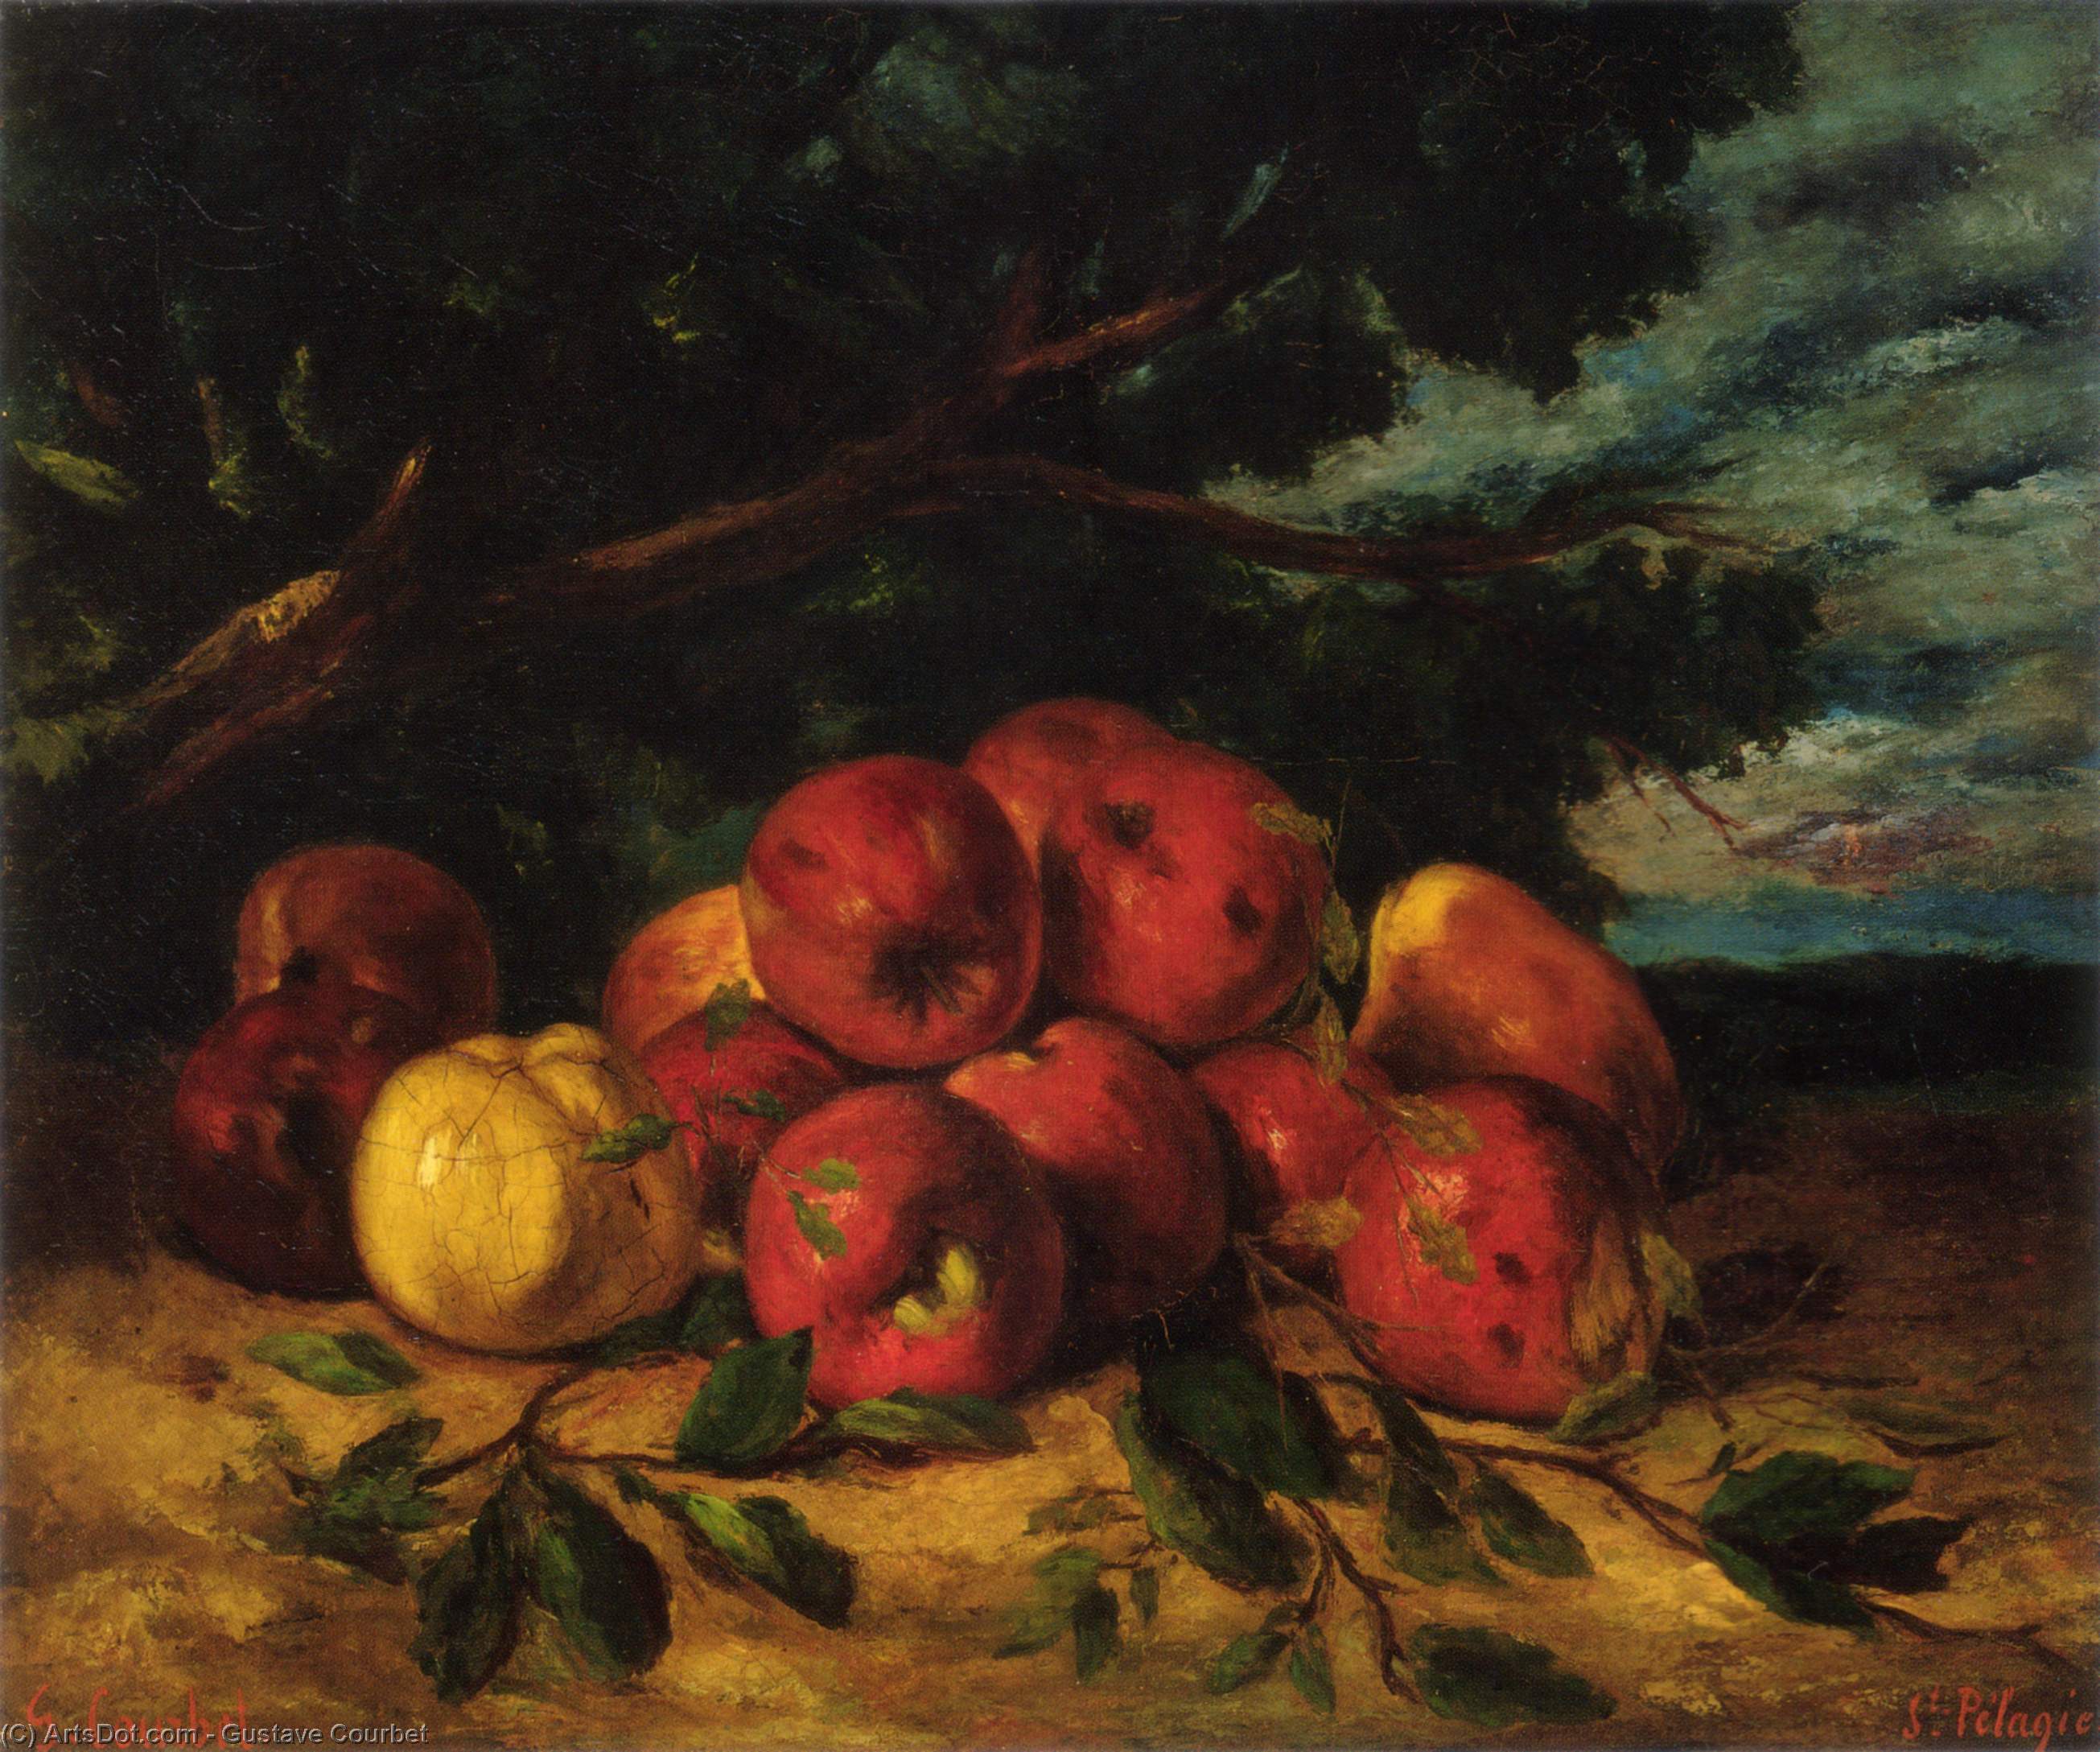 WikiOO.org - دایره المعارف هنرهای زیبا - نقاشی، آثار هنری Gustave Courbet - Red Apples at the Foot of a Tree